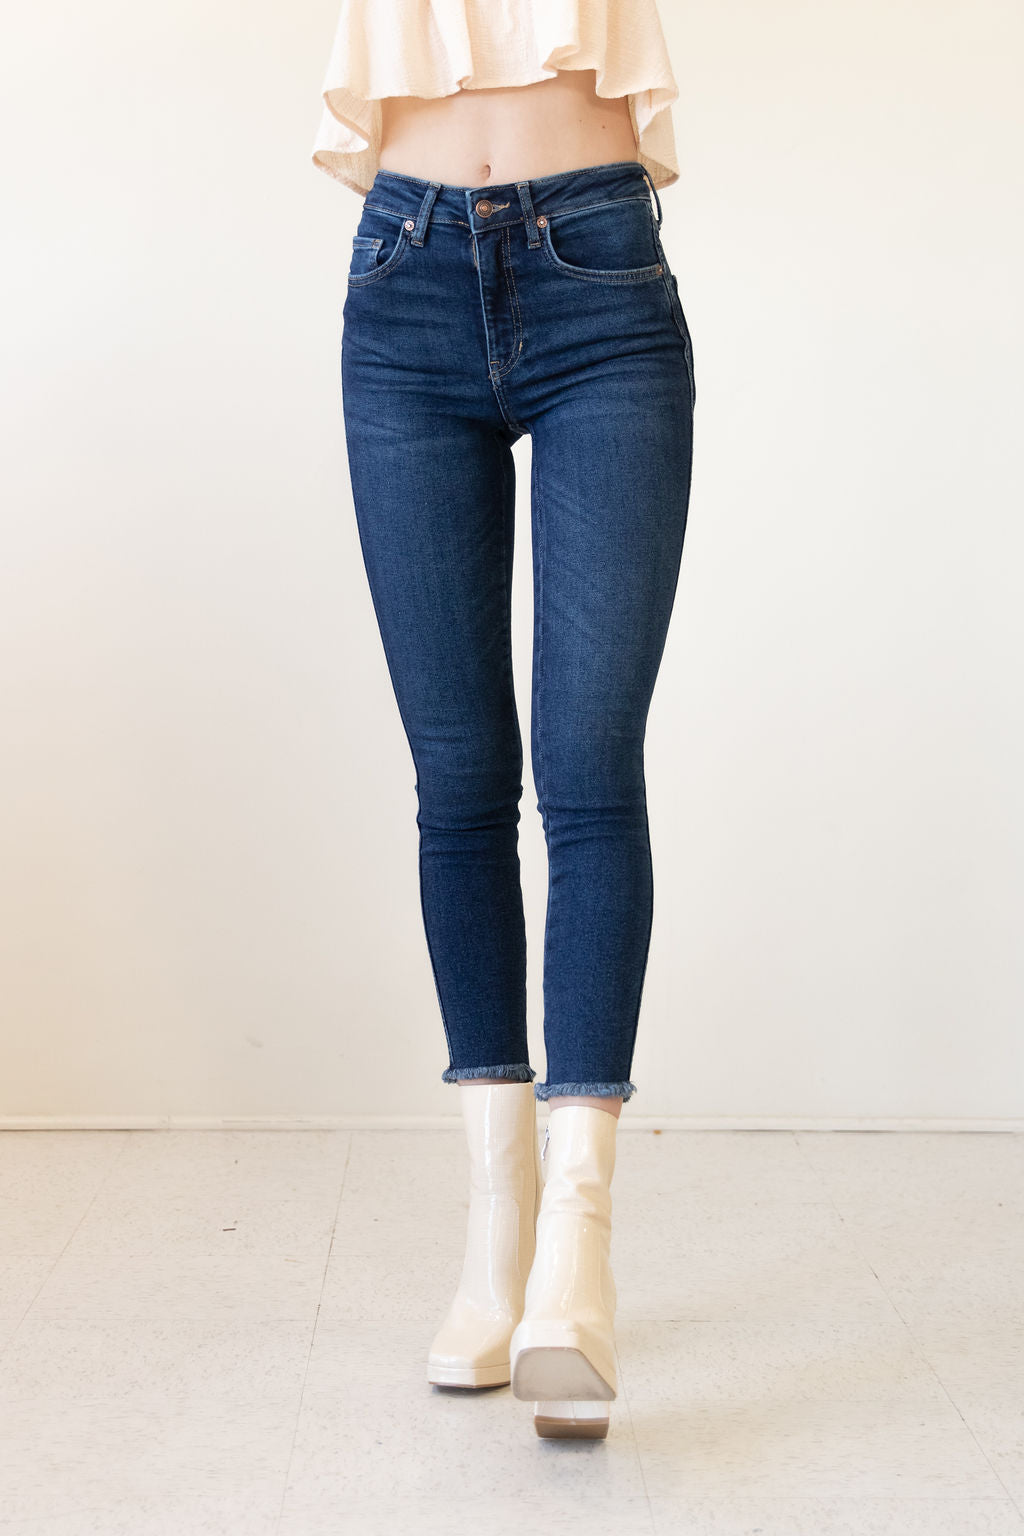 High Rise Skinny Fit Jeans by Free People